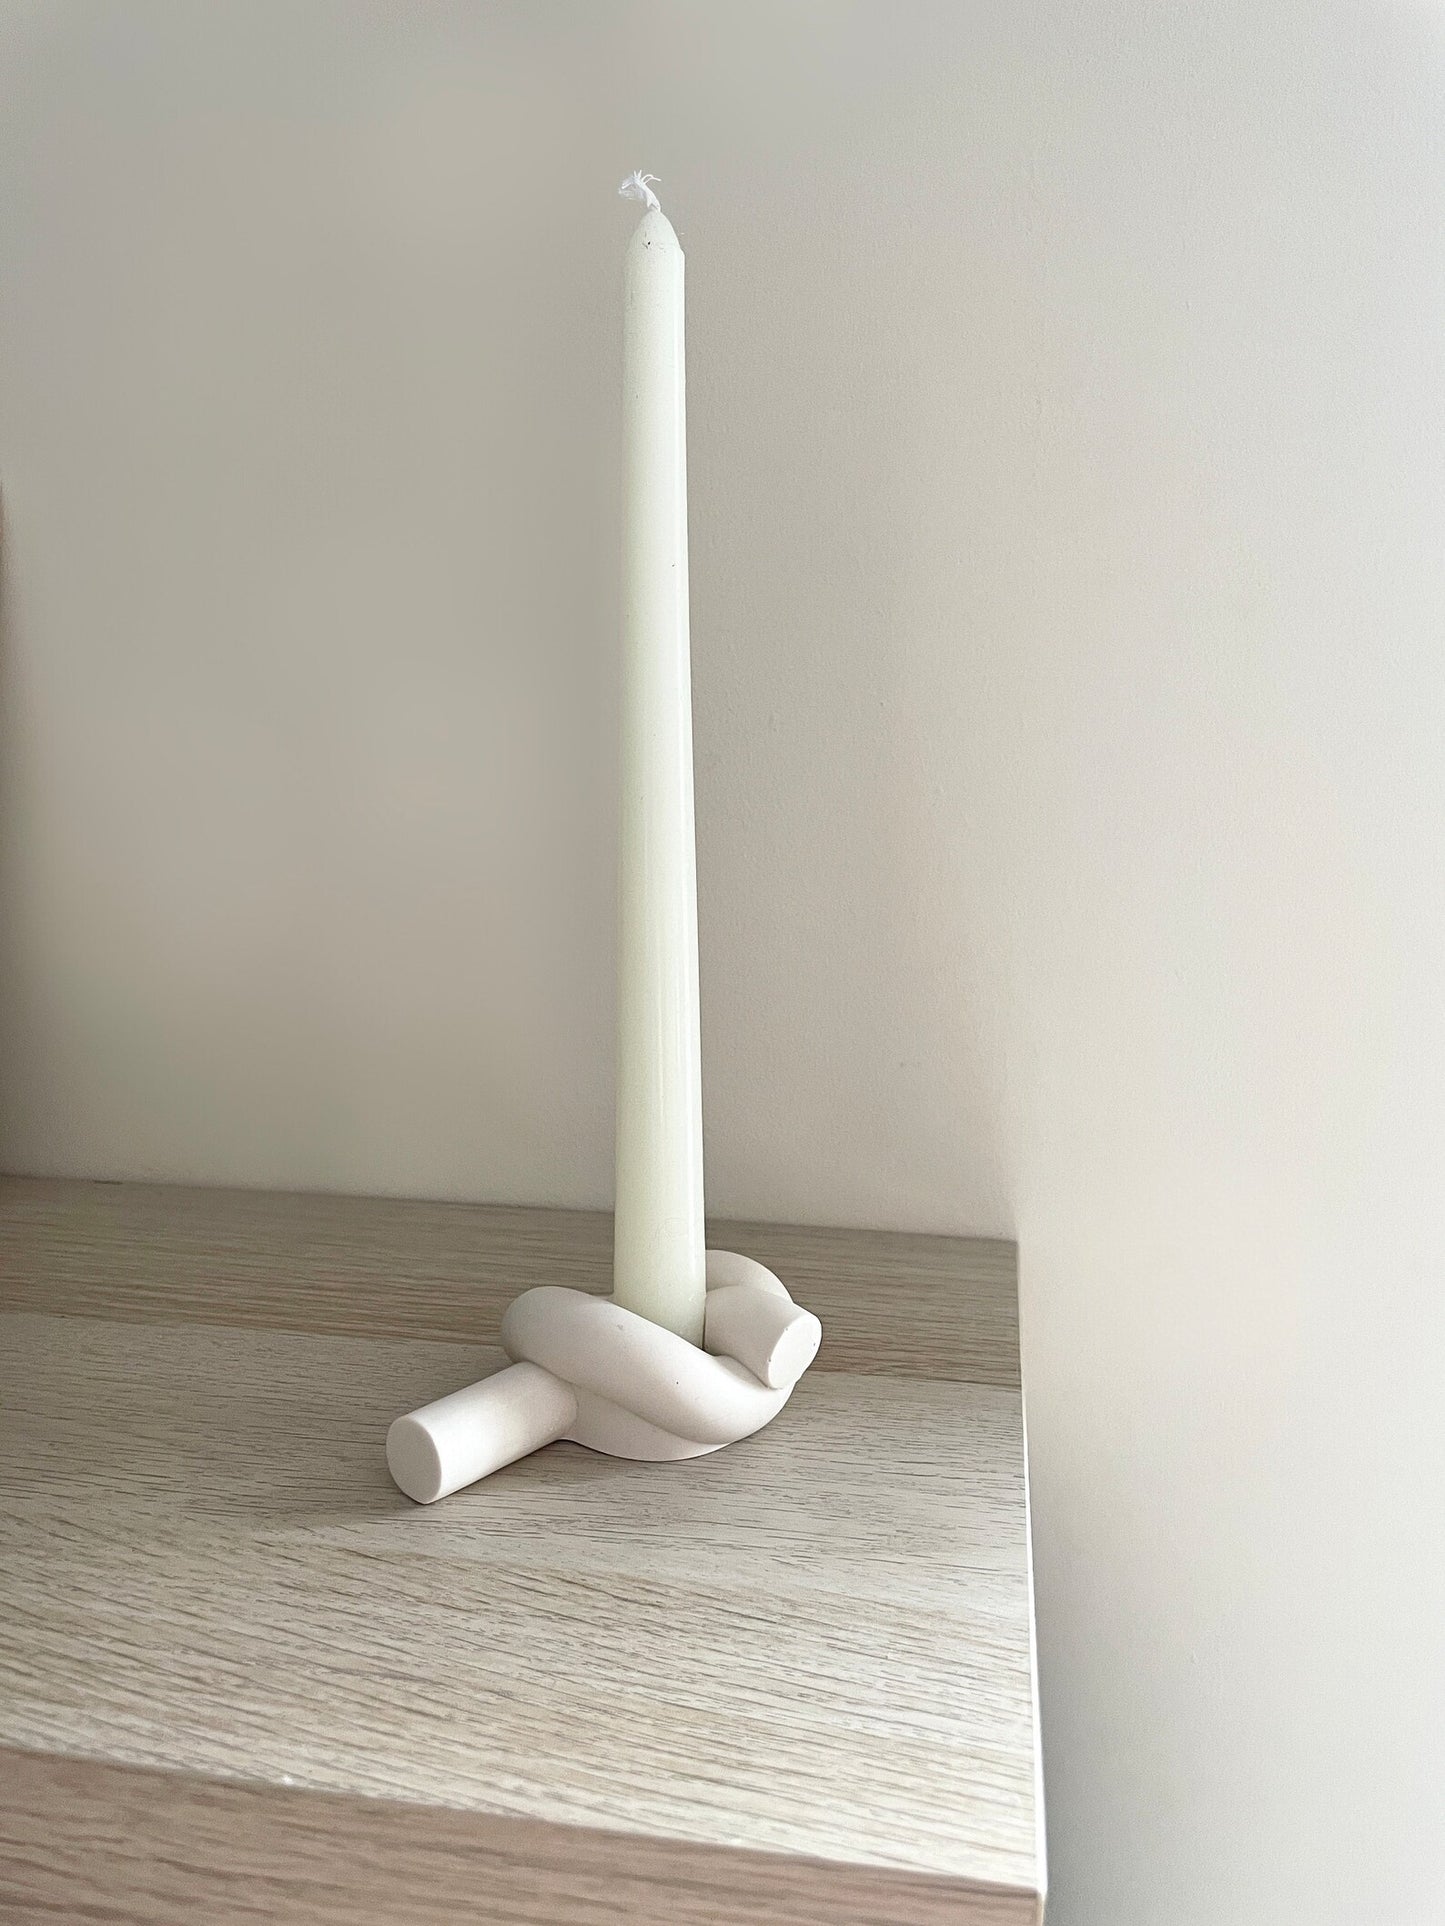 Knot shaped jesomite candlestick holder in Cream or Lilac